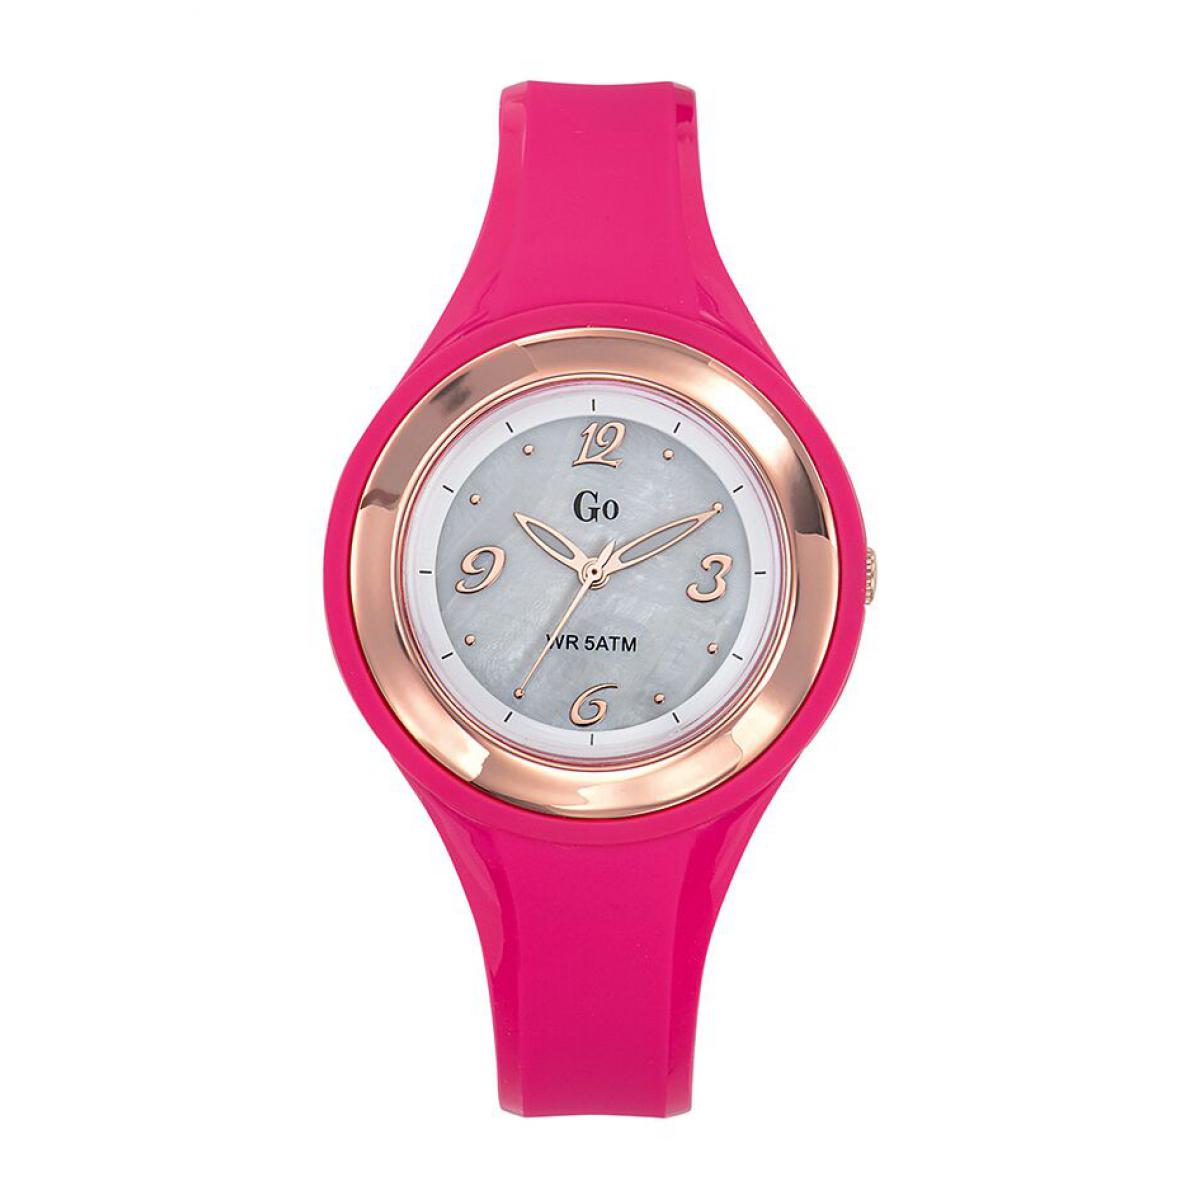 Montre Go Girl Only 699185 - Montre Silicone Rose Femme